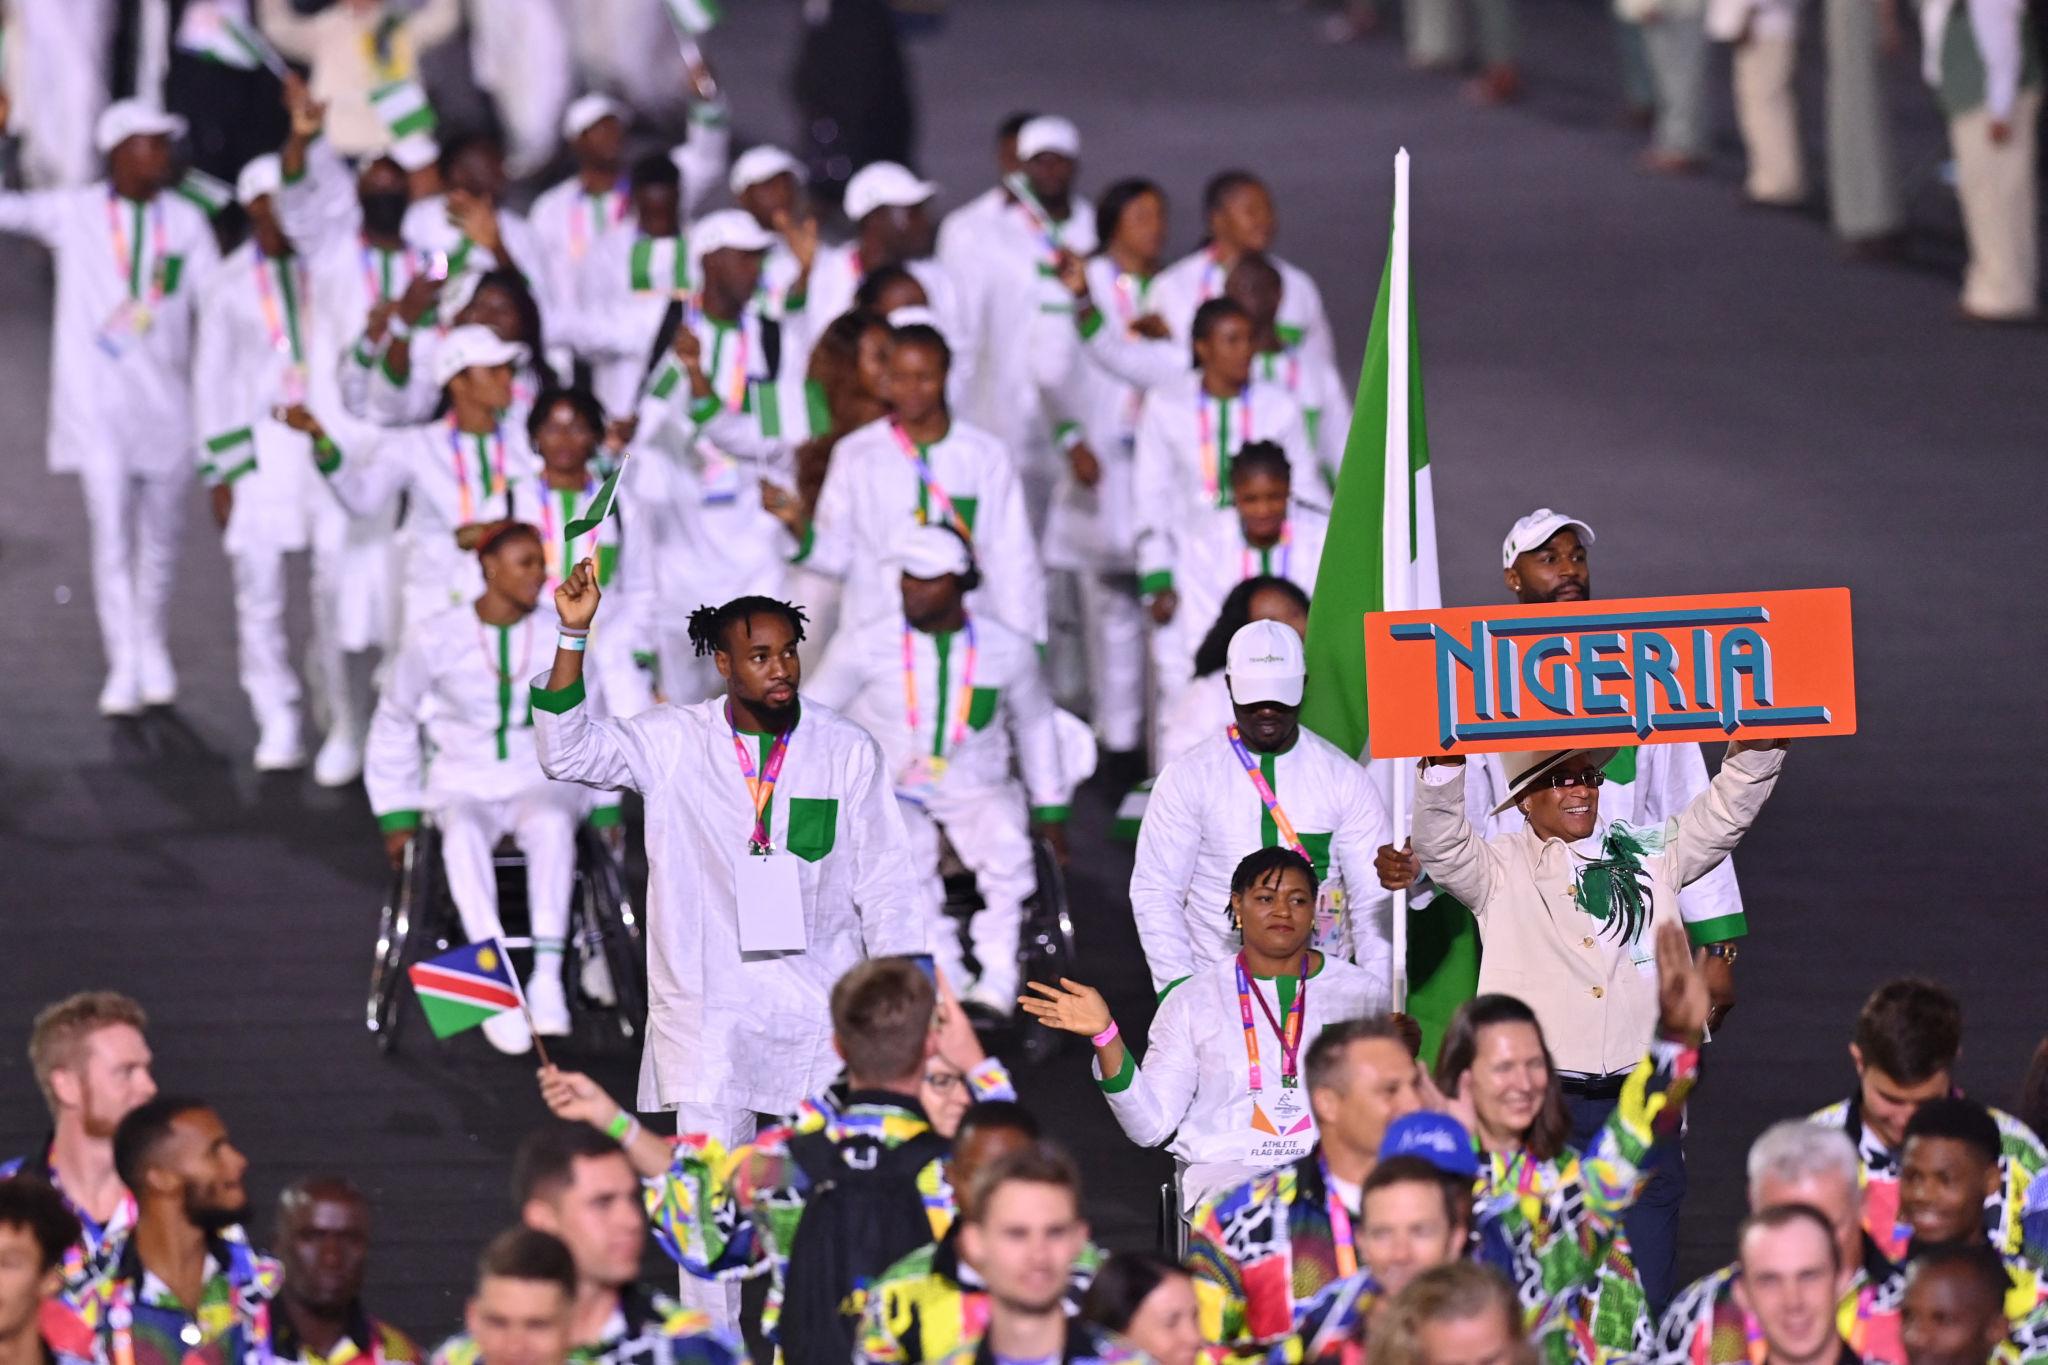 Team Nigeria for di opening ceremony of Commonwealth Games for Birmingham